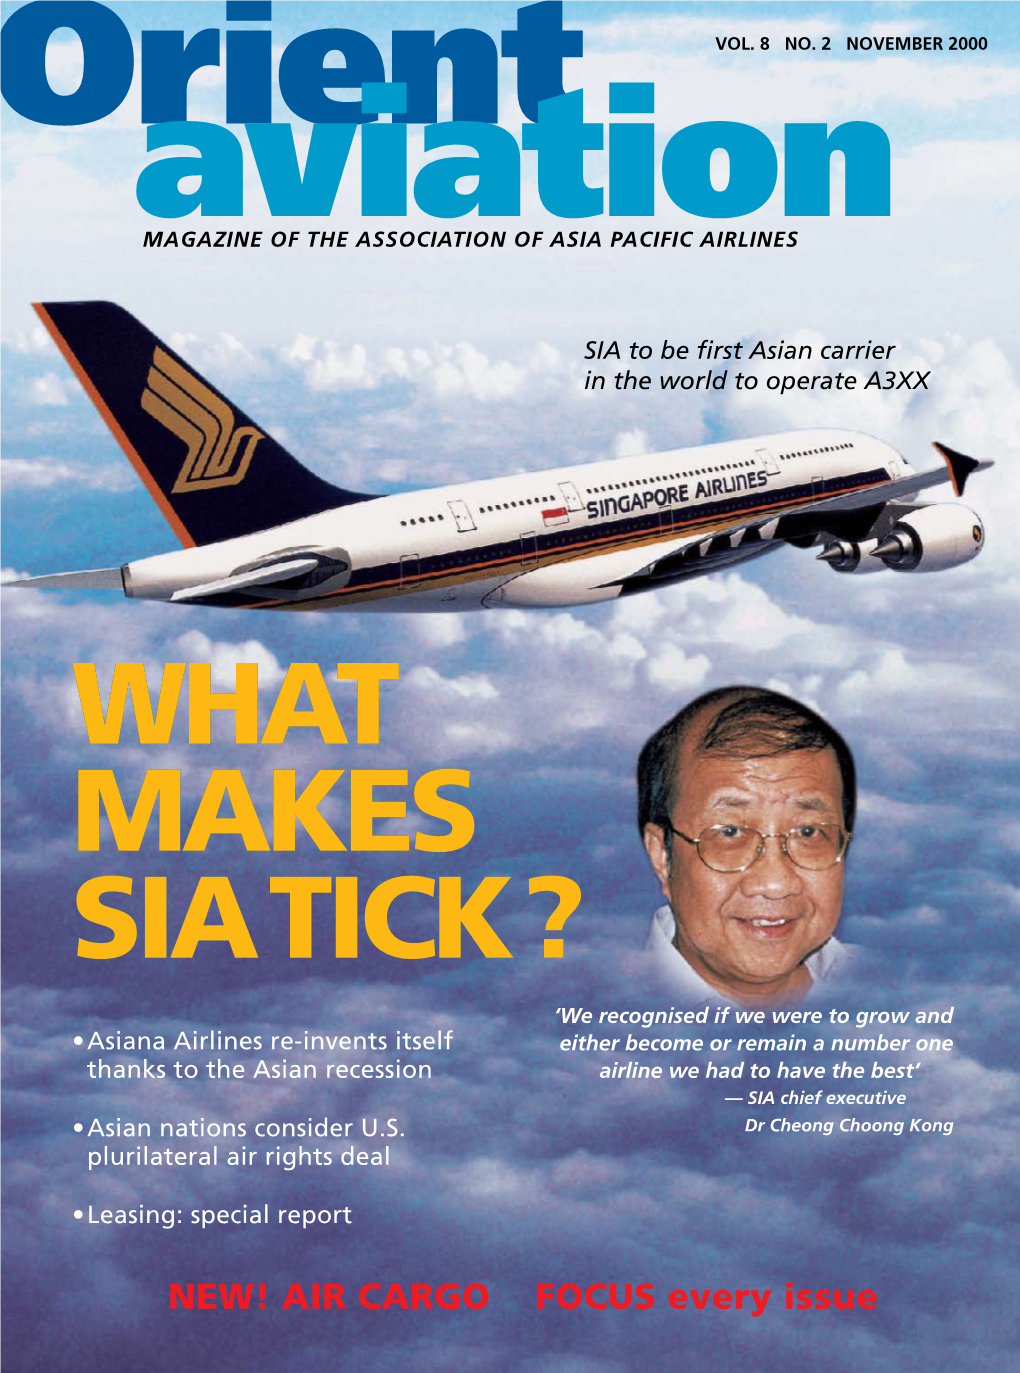 Singapore Airlines (SIA) but What Can Be Staid About Buying 49% of Virgin Atlantic Airways Suppliers Will Tell You